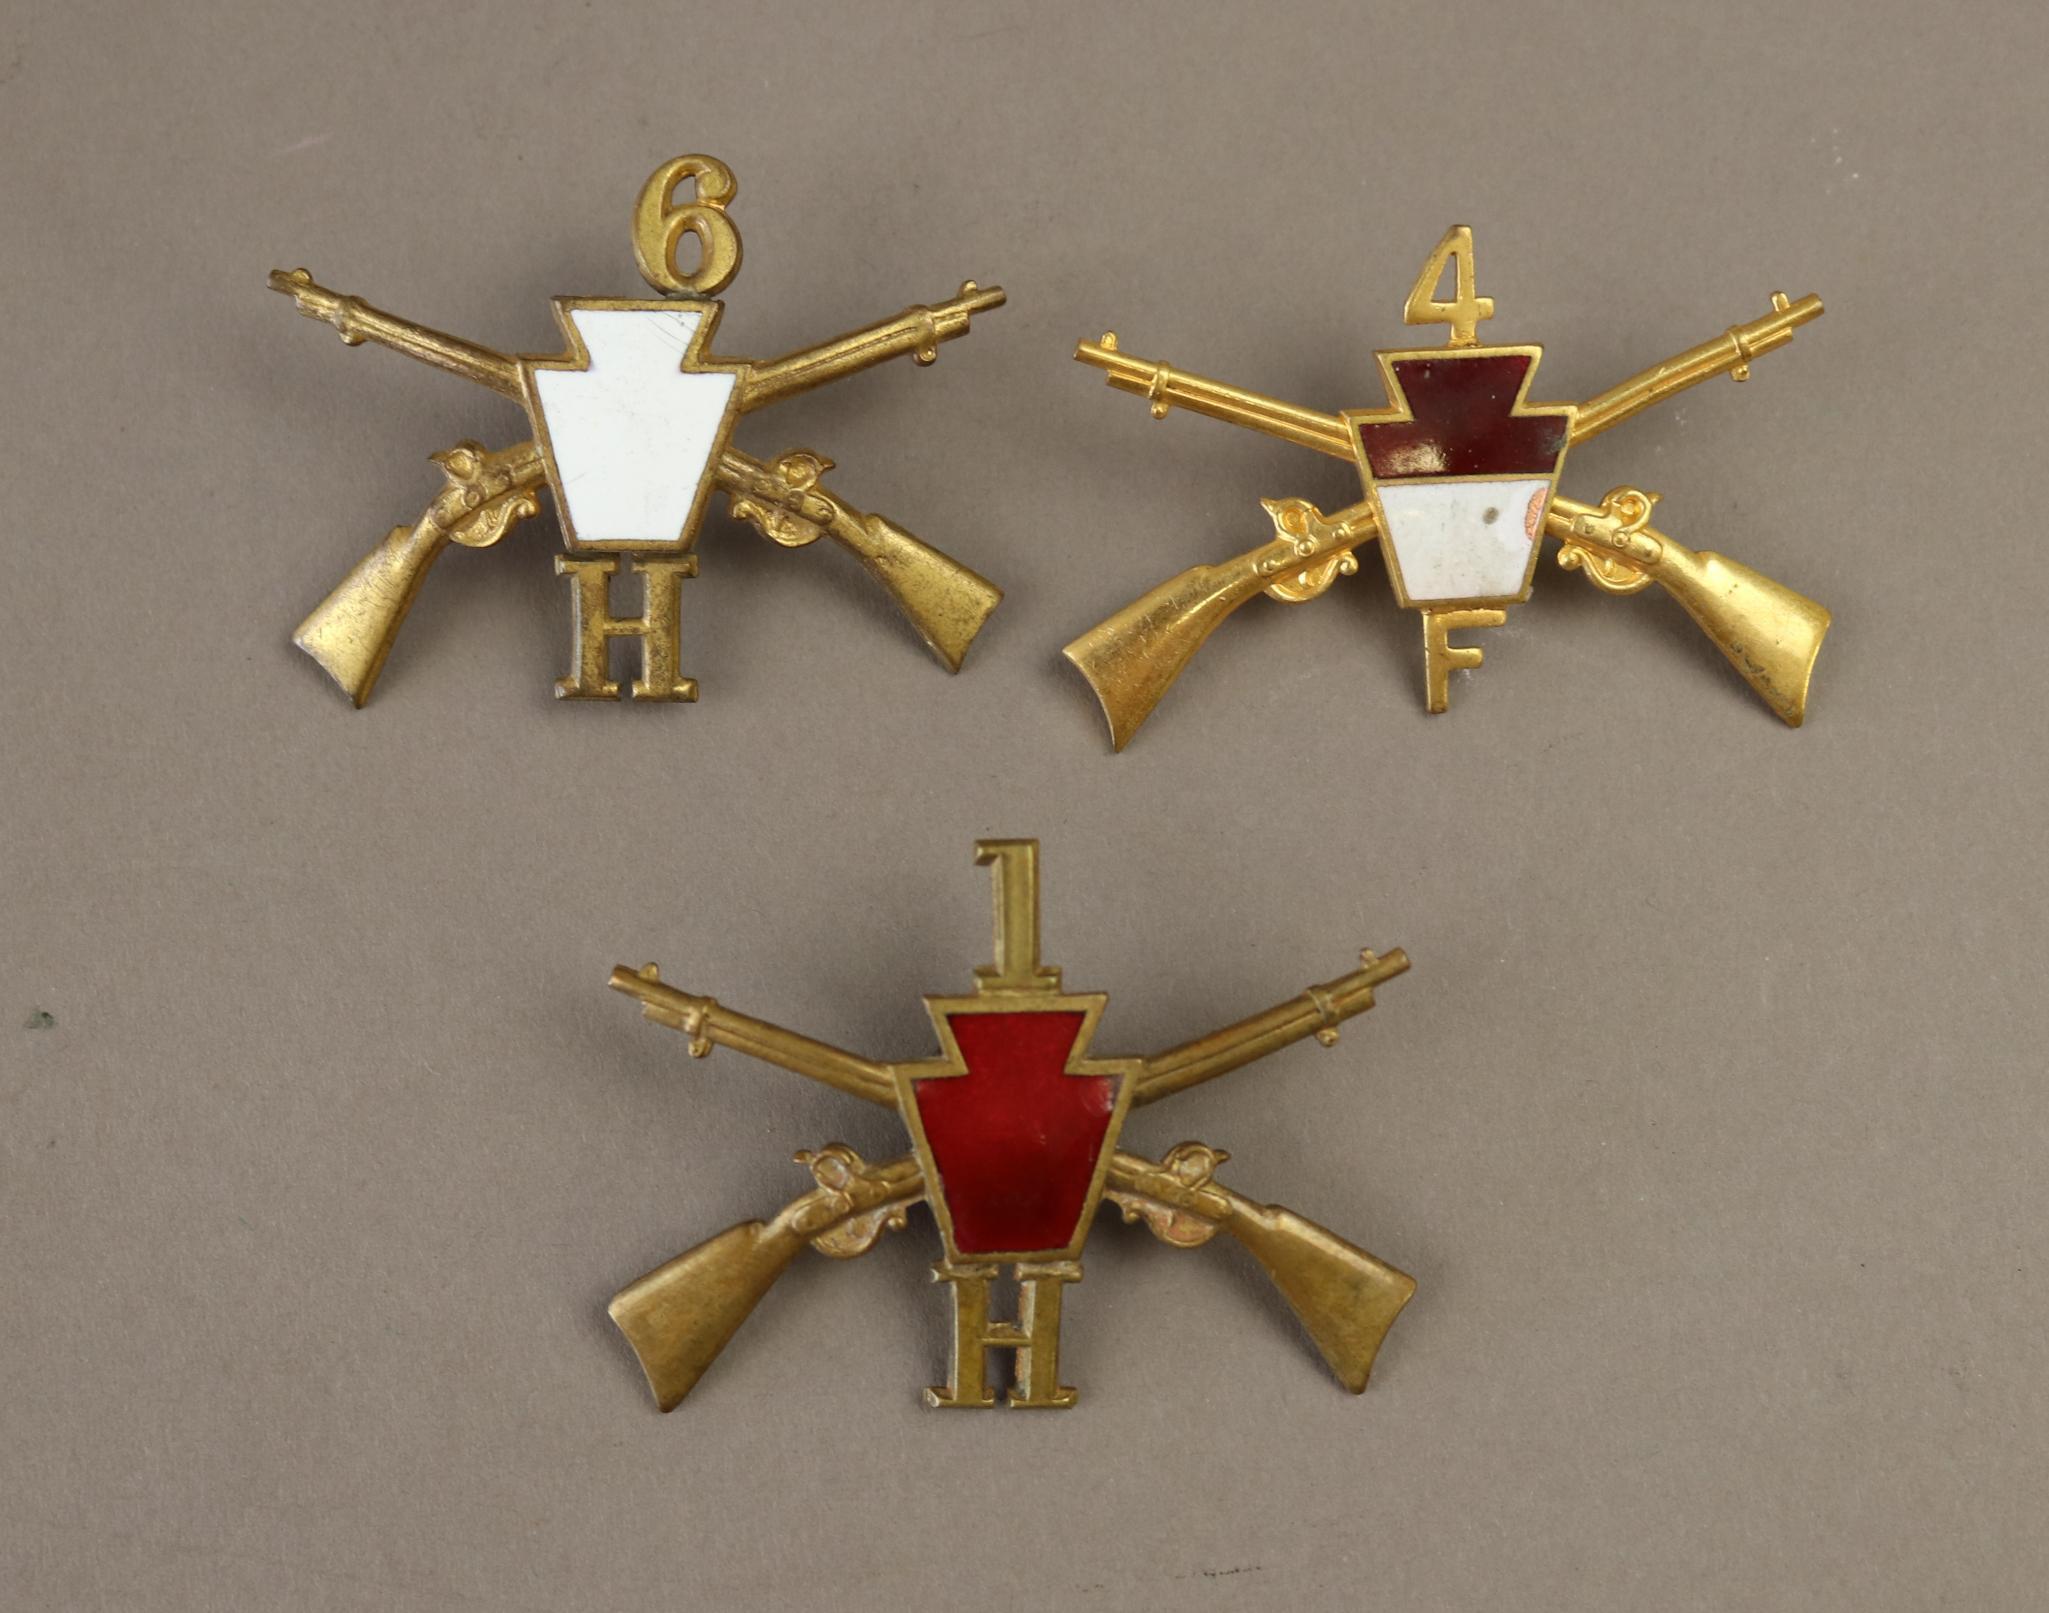 Grouping of Early 20th Century Pennsylvania Military Hat Insignia